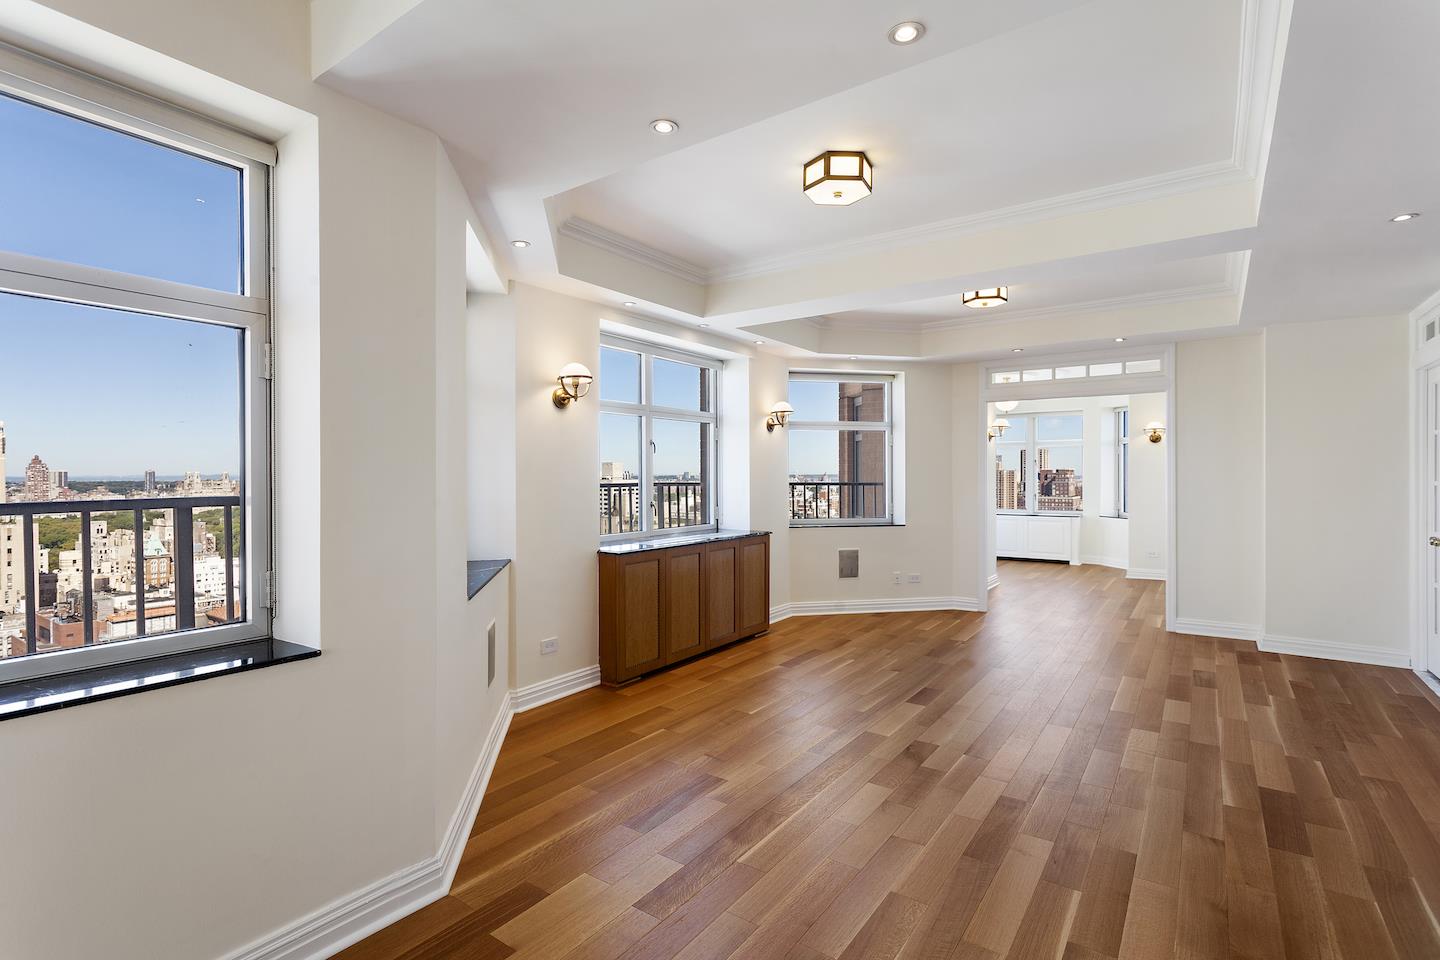 188 East 76th Street Ph-A, Upper East Side, Upper East Side, NYC - 5 Bedrooms  
5.5 Bathrooms  
9 Rooms - 